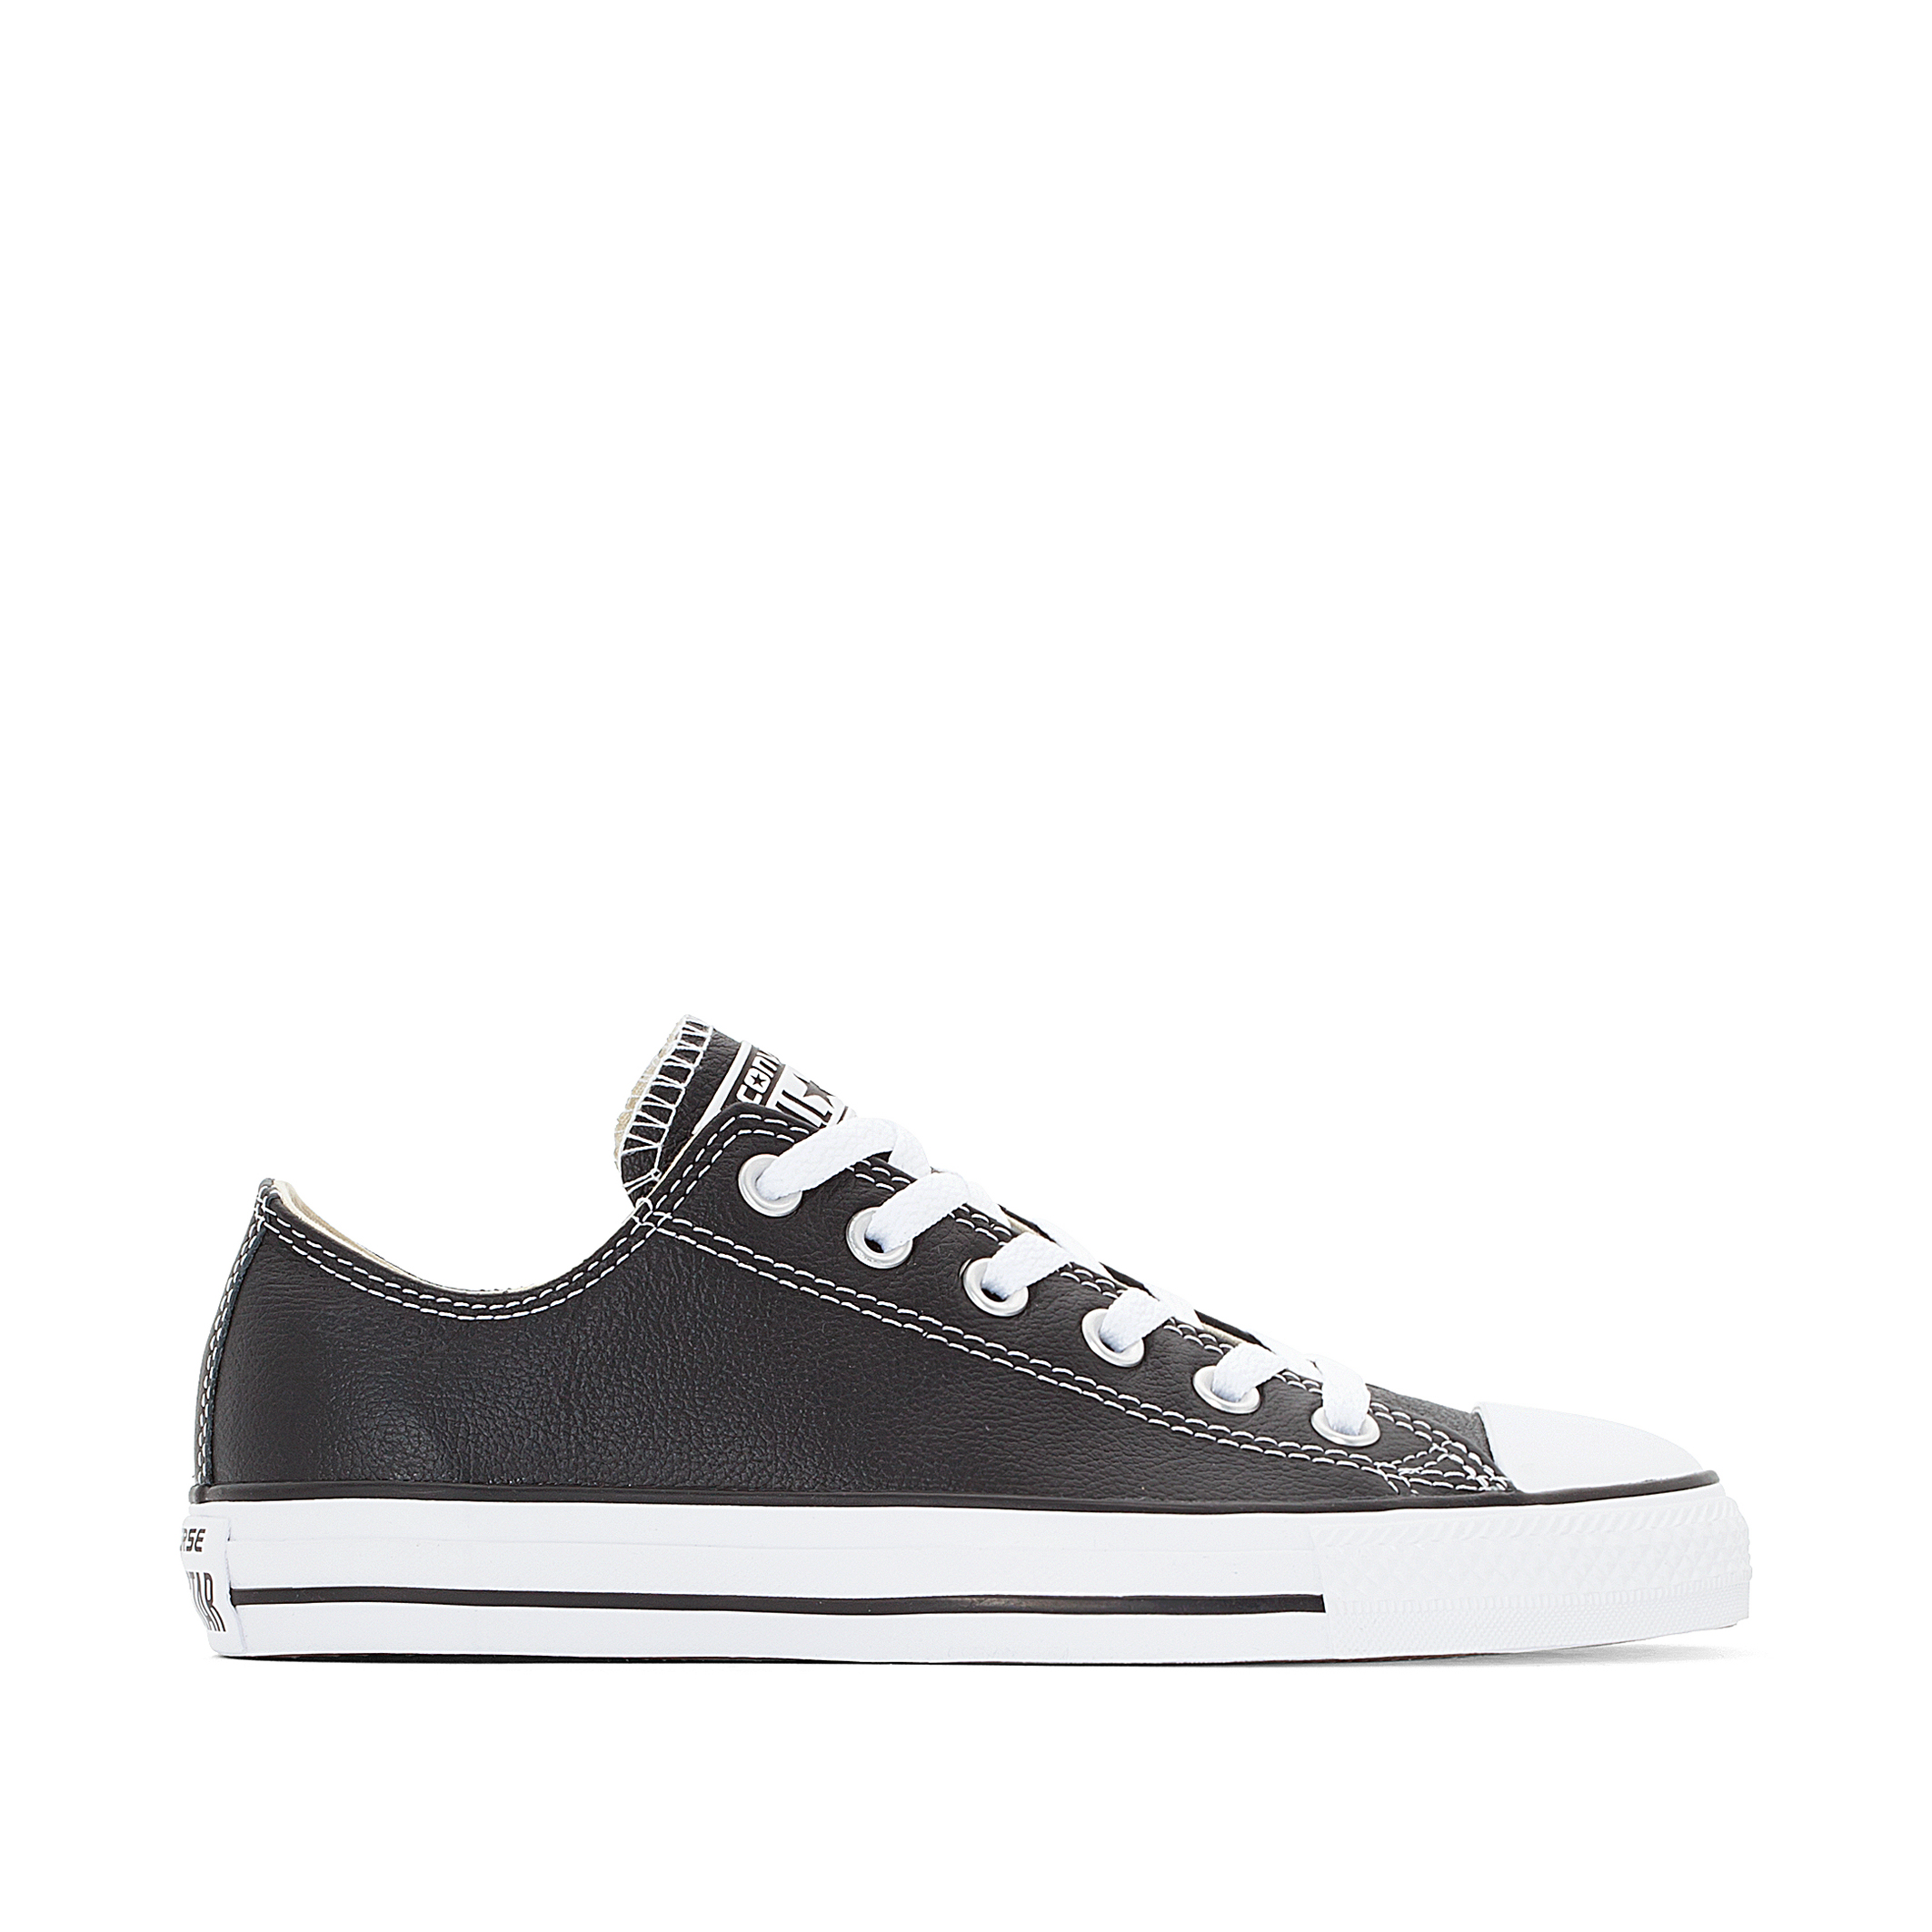 converse all star ox black leather womens trainers